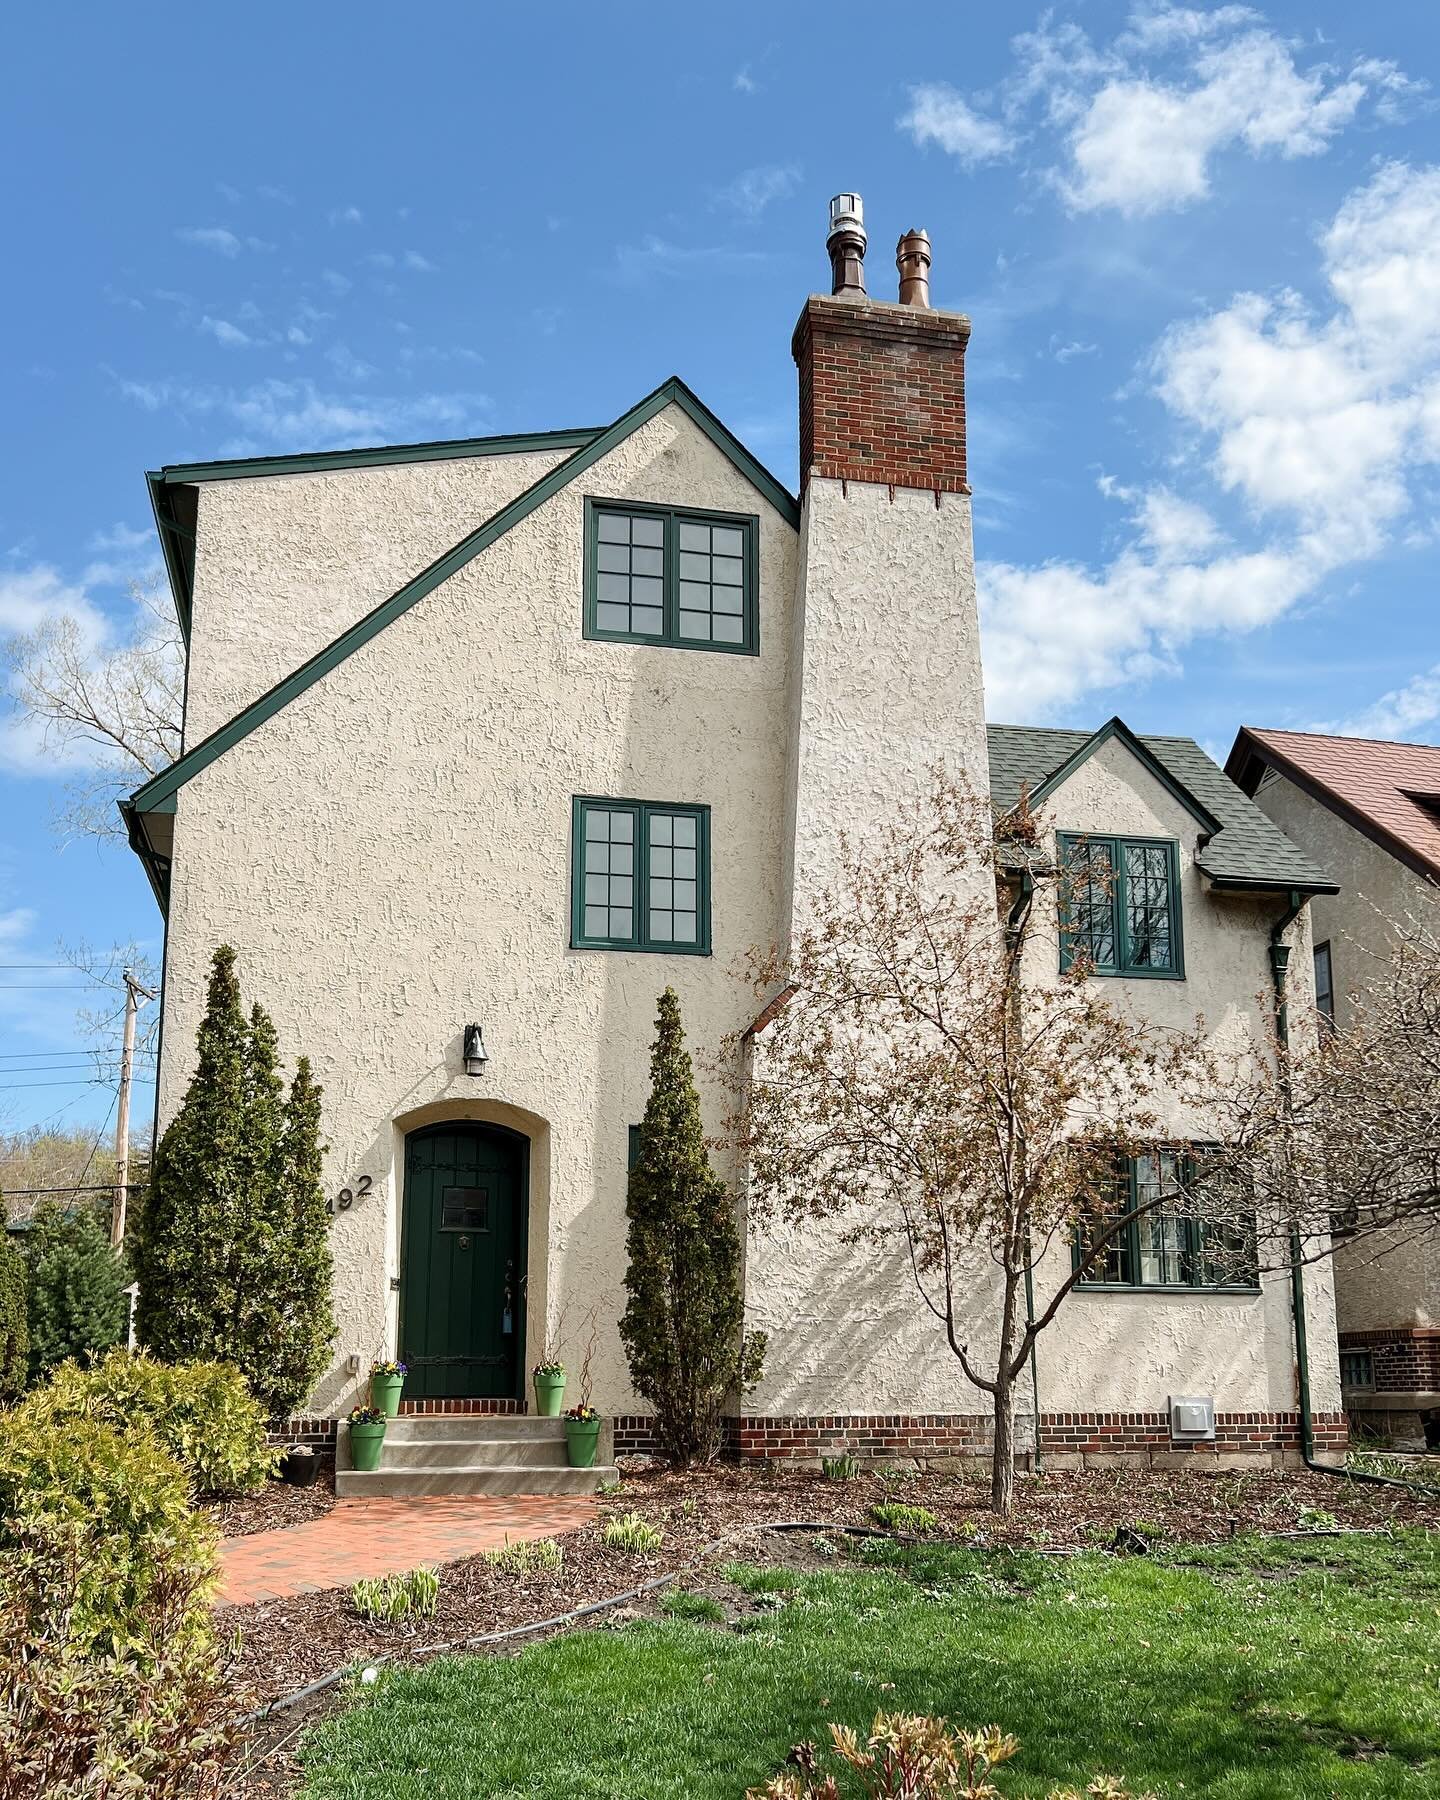 Four levels of living in this renovated tudor. A ton of original charm and new finishes. I love the light thoughout this home and the stained glass is one of my favorites I&rsquo;ve seen!

Interested in finding your own home to love? Fill out my &lsq